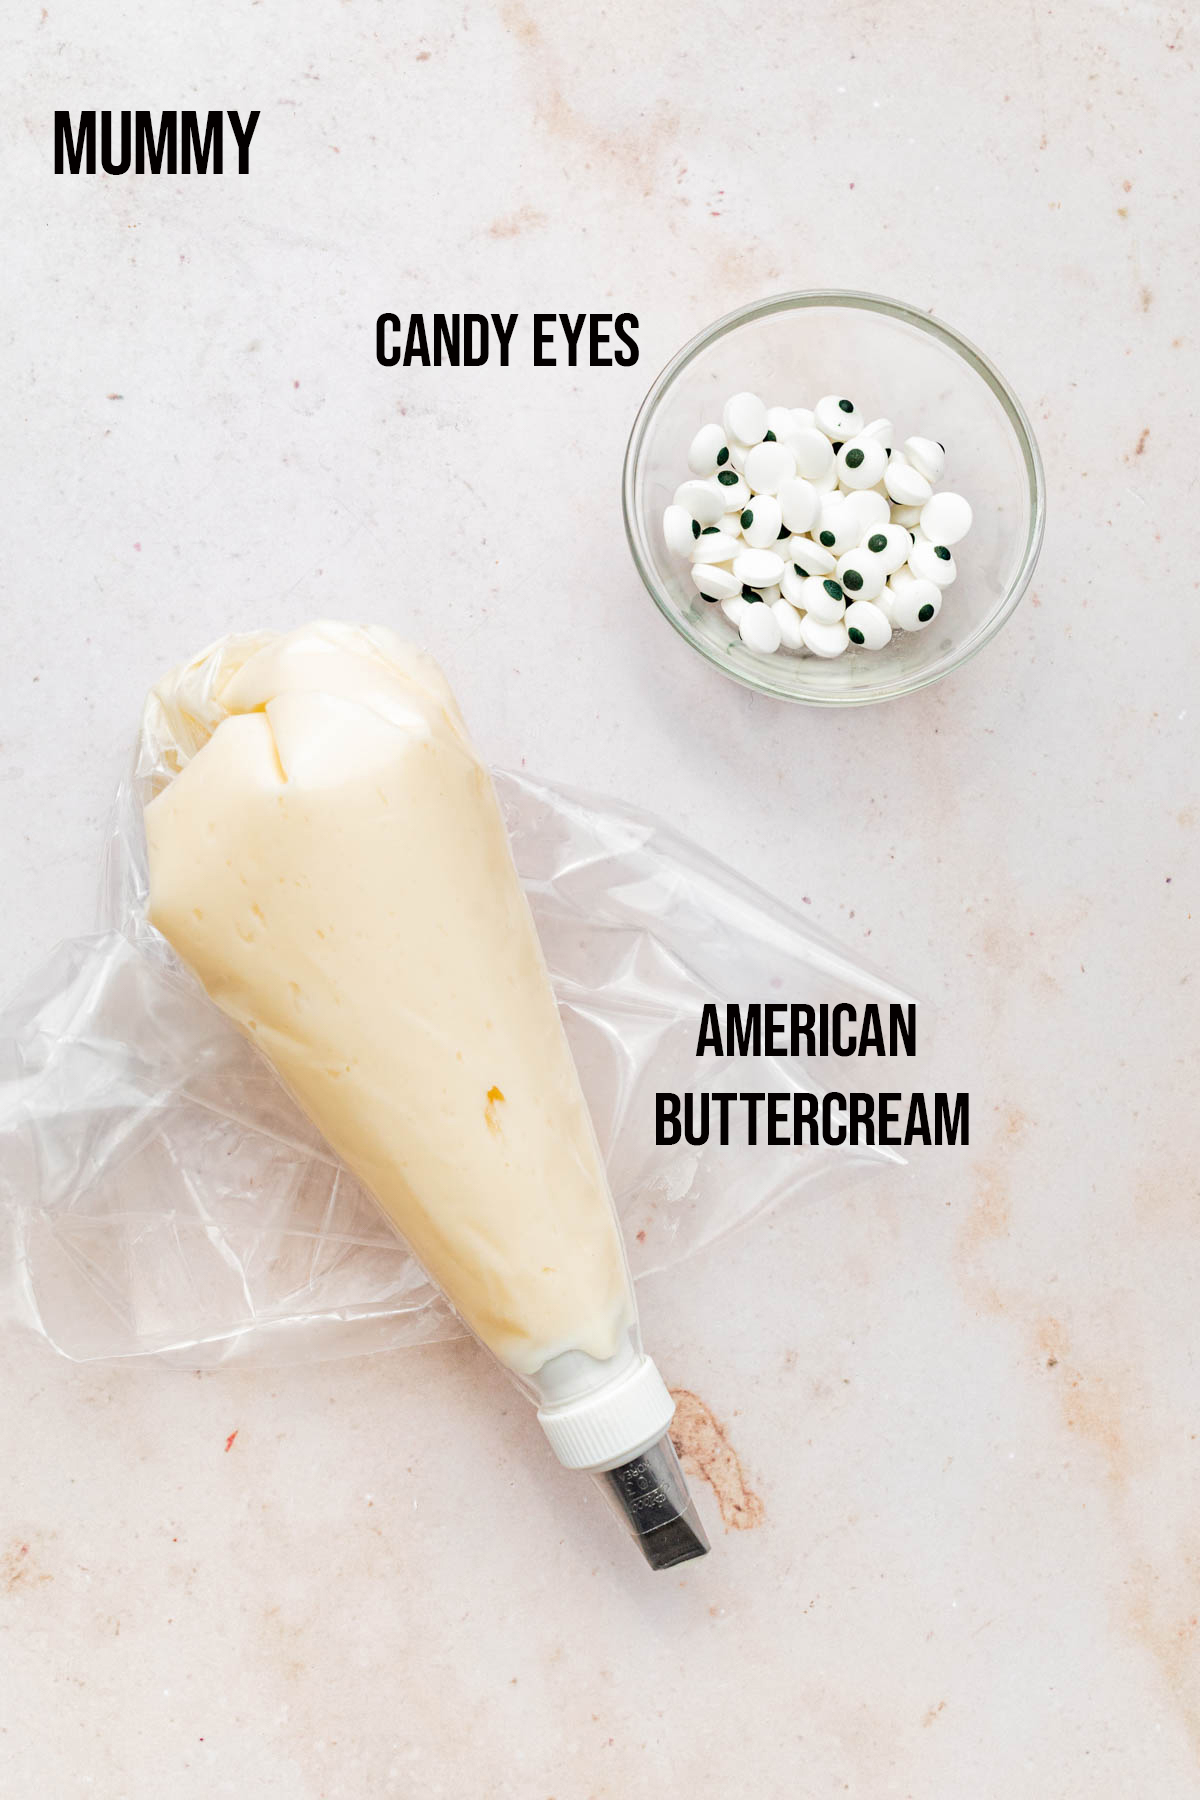 Candy eyes and piping bag of white frosting.